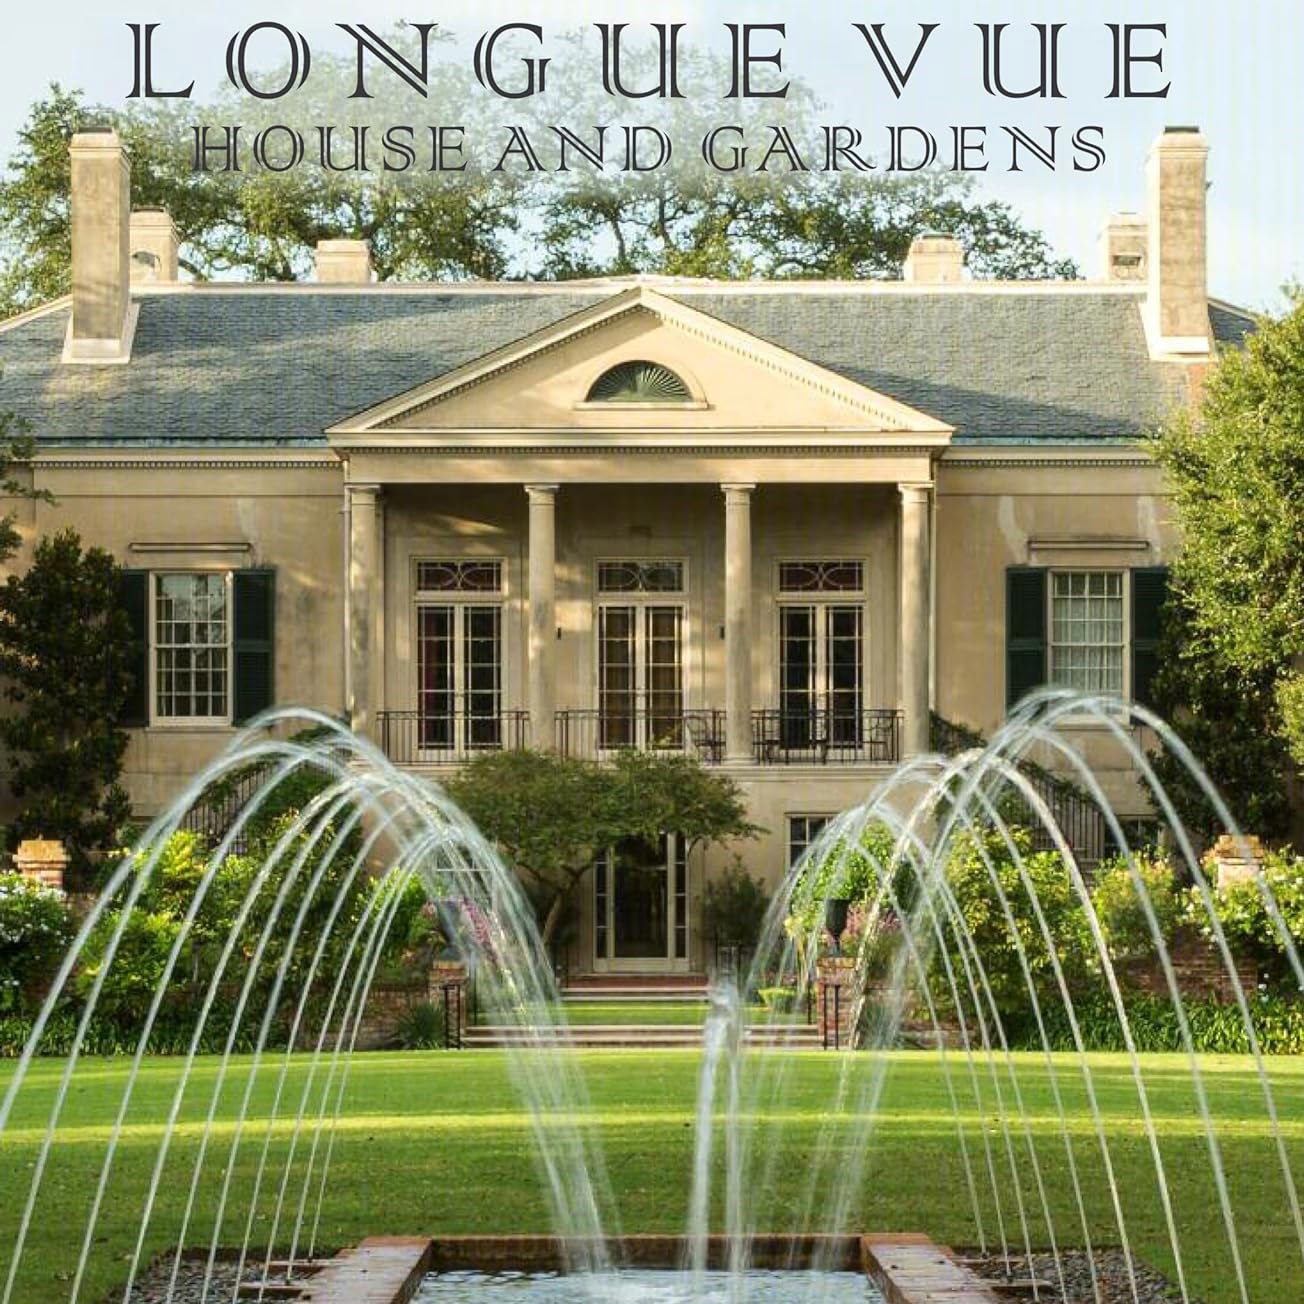 cover image of the book "Longue Vue House and Gardens: The Architecture, Interiors, and Gardens of New Orleans' Most Celebrated Estate"